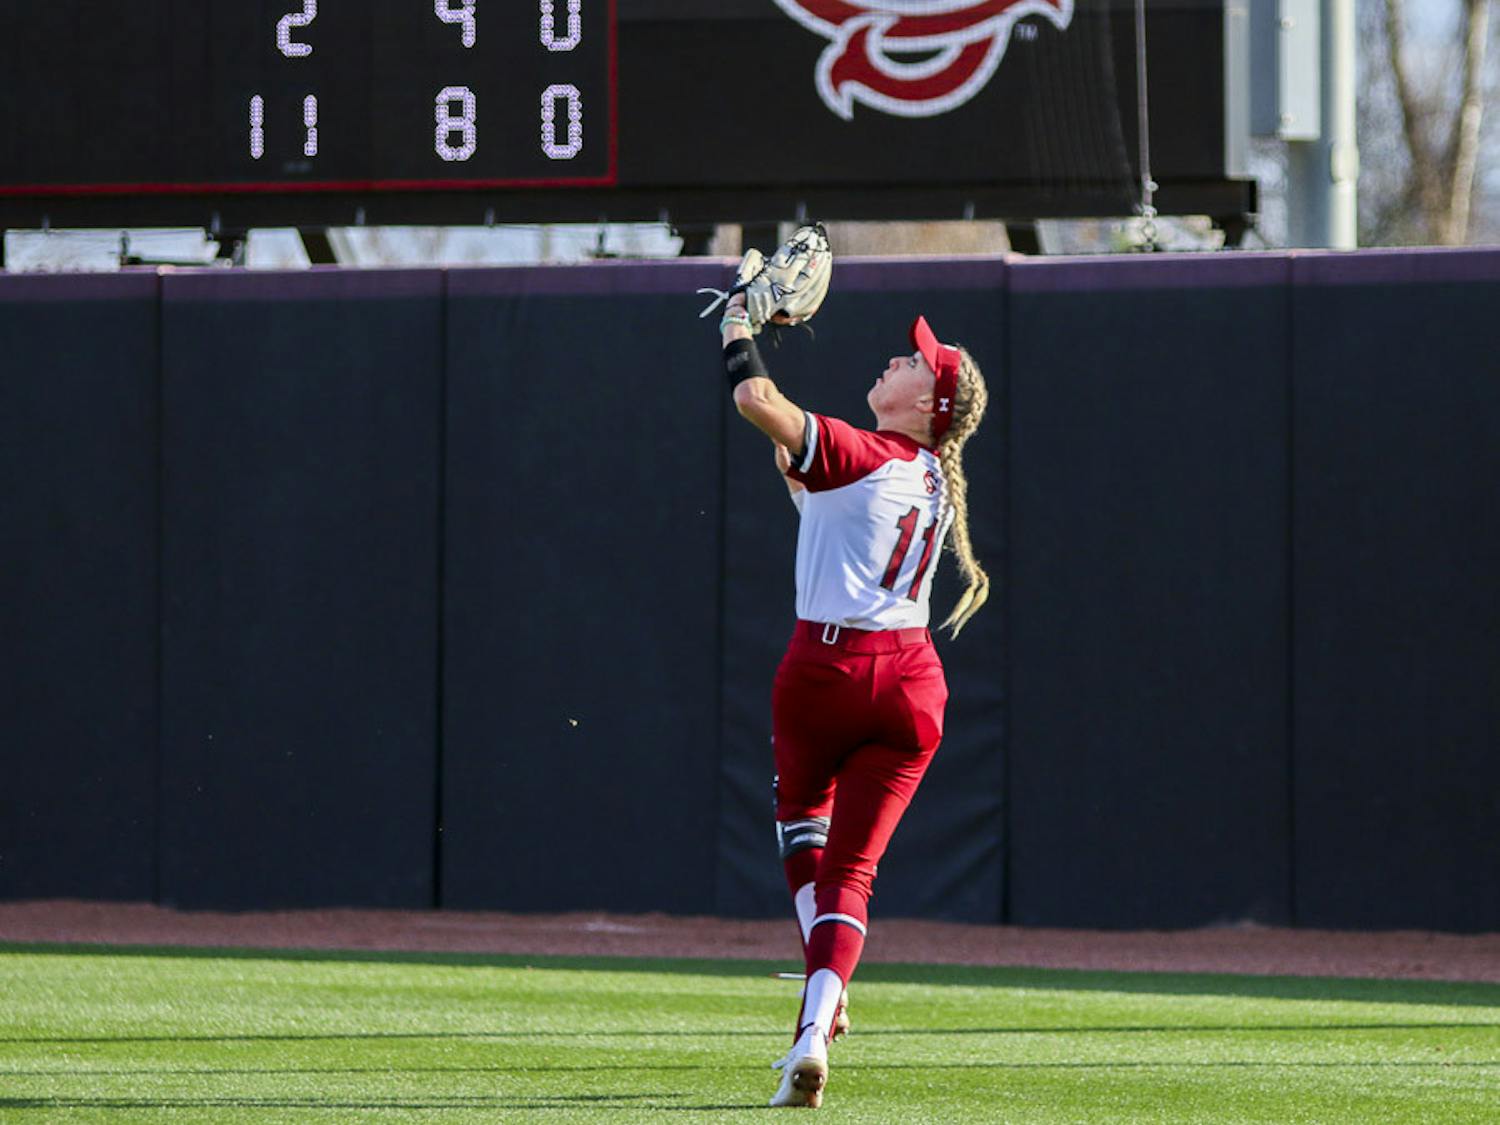 Fifth-year outfielder Haley Simpson chases after a fly ball during the matchup between South Carolina and Western Kentucky University on Feb. 19, 2023. The Gamecocks beat the Hilltoppers 11-2.&nbsp;